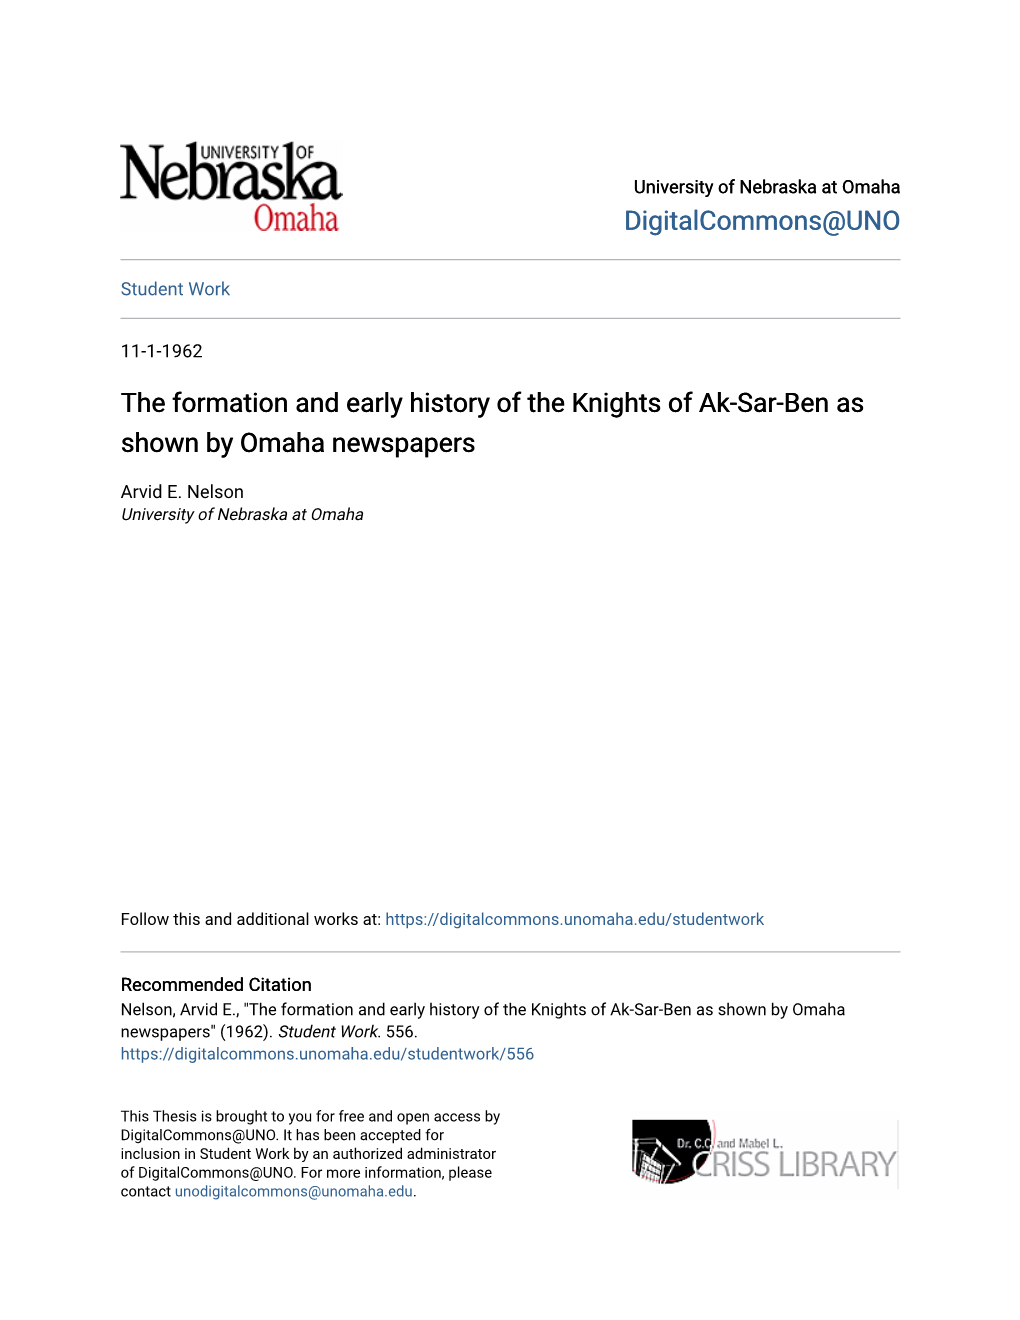 The Formation and Early History of the Knights of Ak-Sar-Ben As Shown by Omaha Newspapers